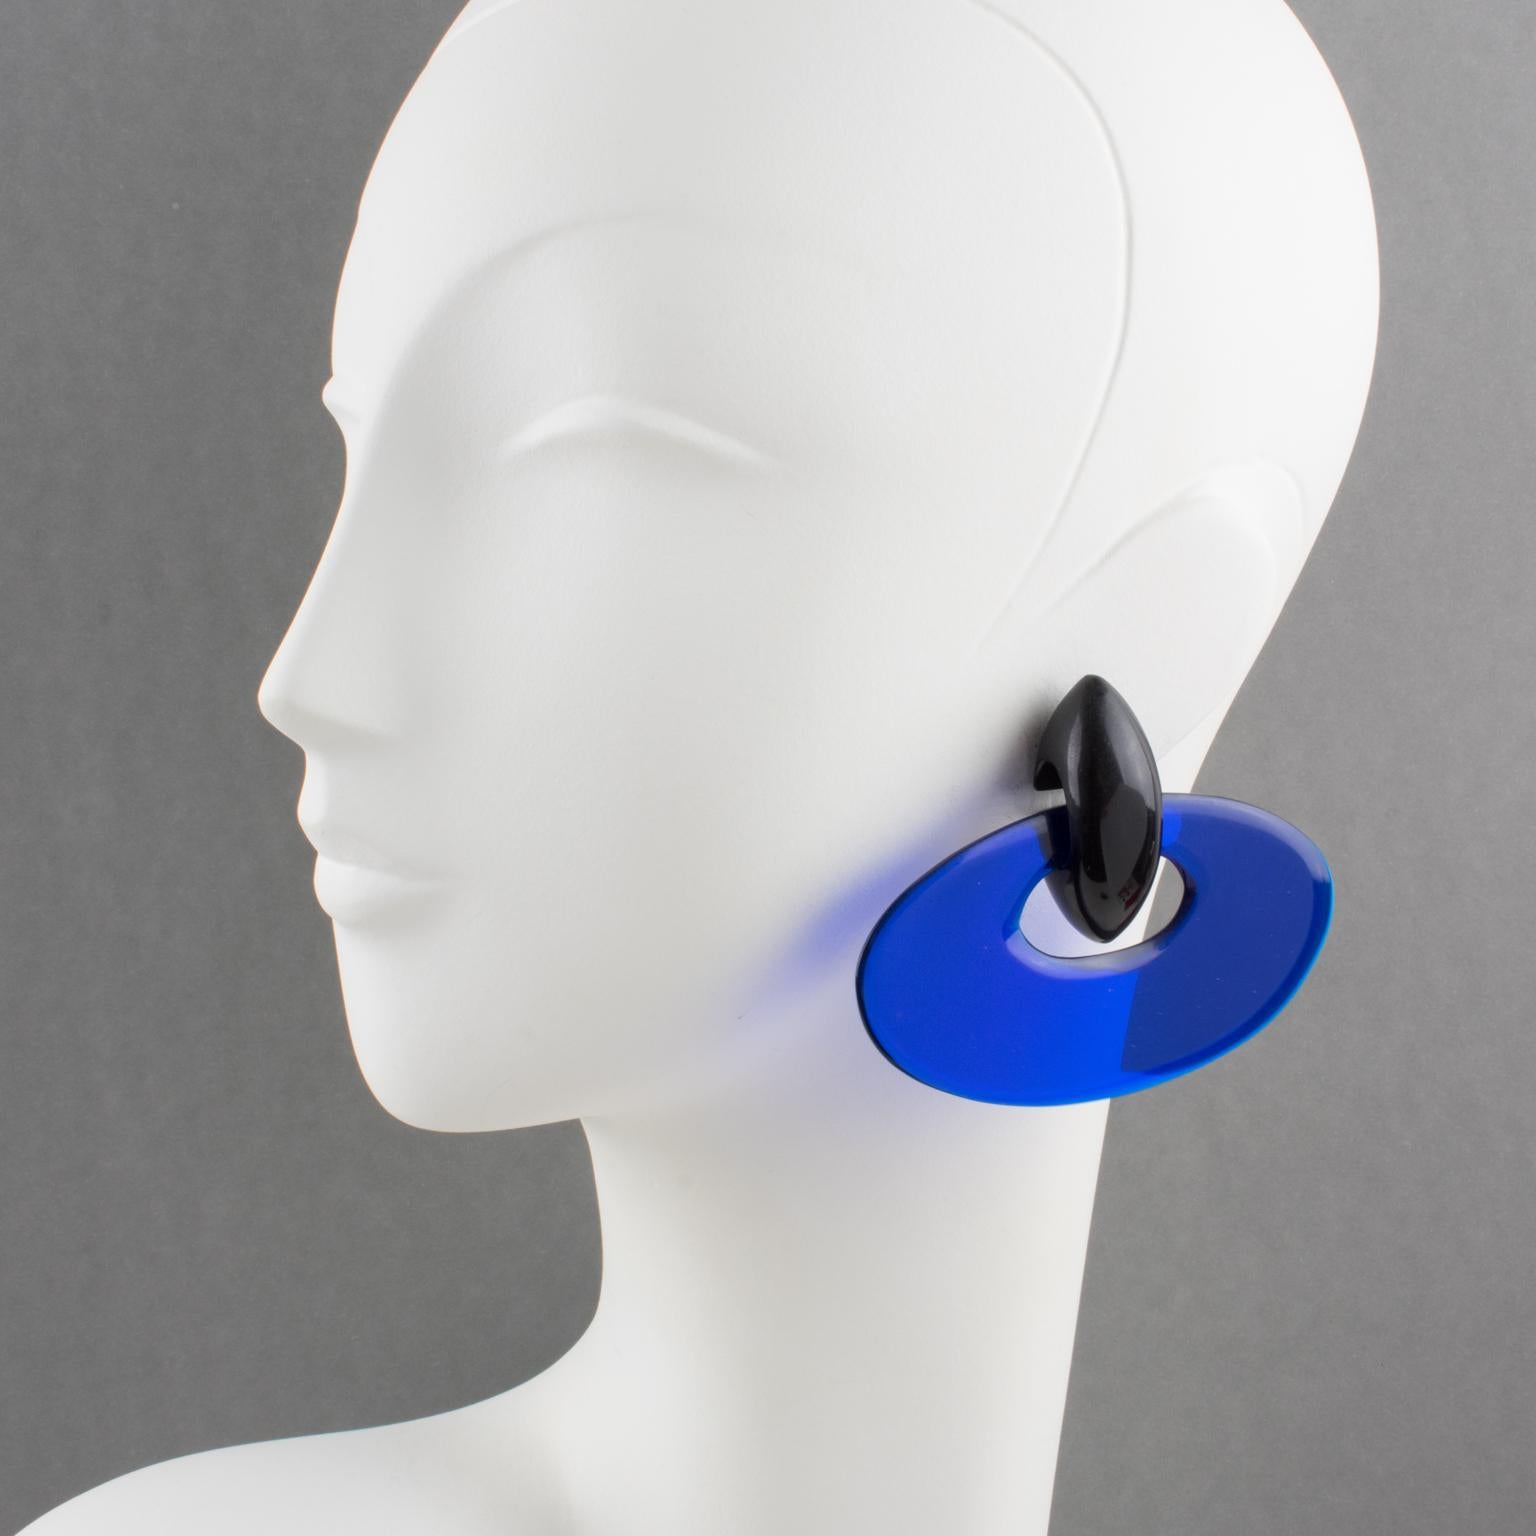 Charming oversized clip-on earrings by Gerda Lyngaard for Monies. Dangling extra-large ellipse donut in transparent cobalt blue resin contrasted with Ebony wood drop element. Marked 